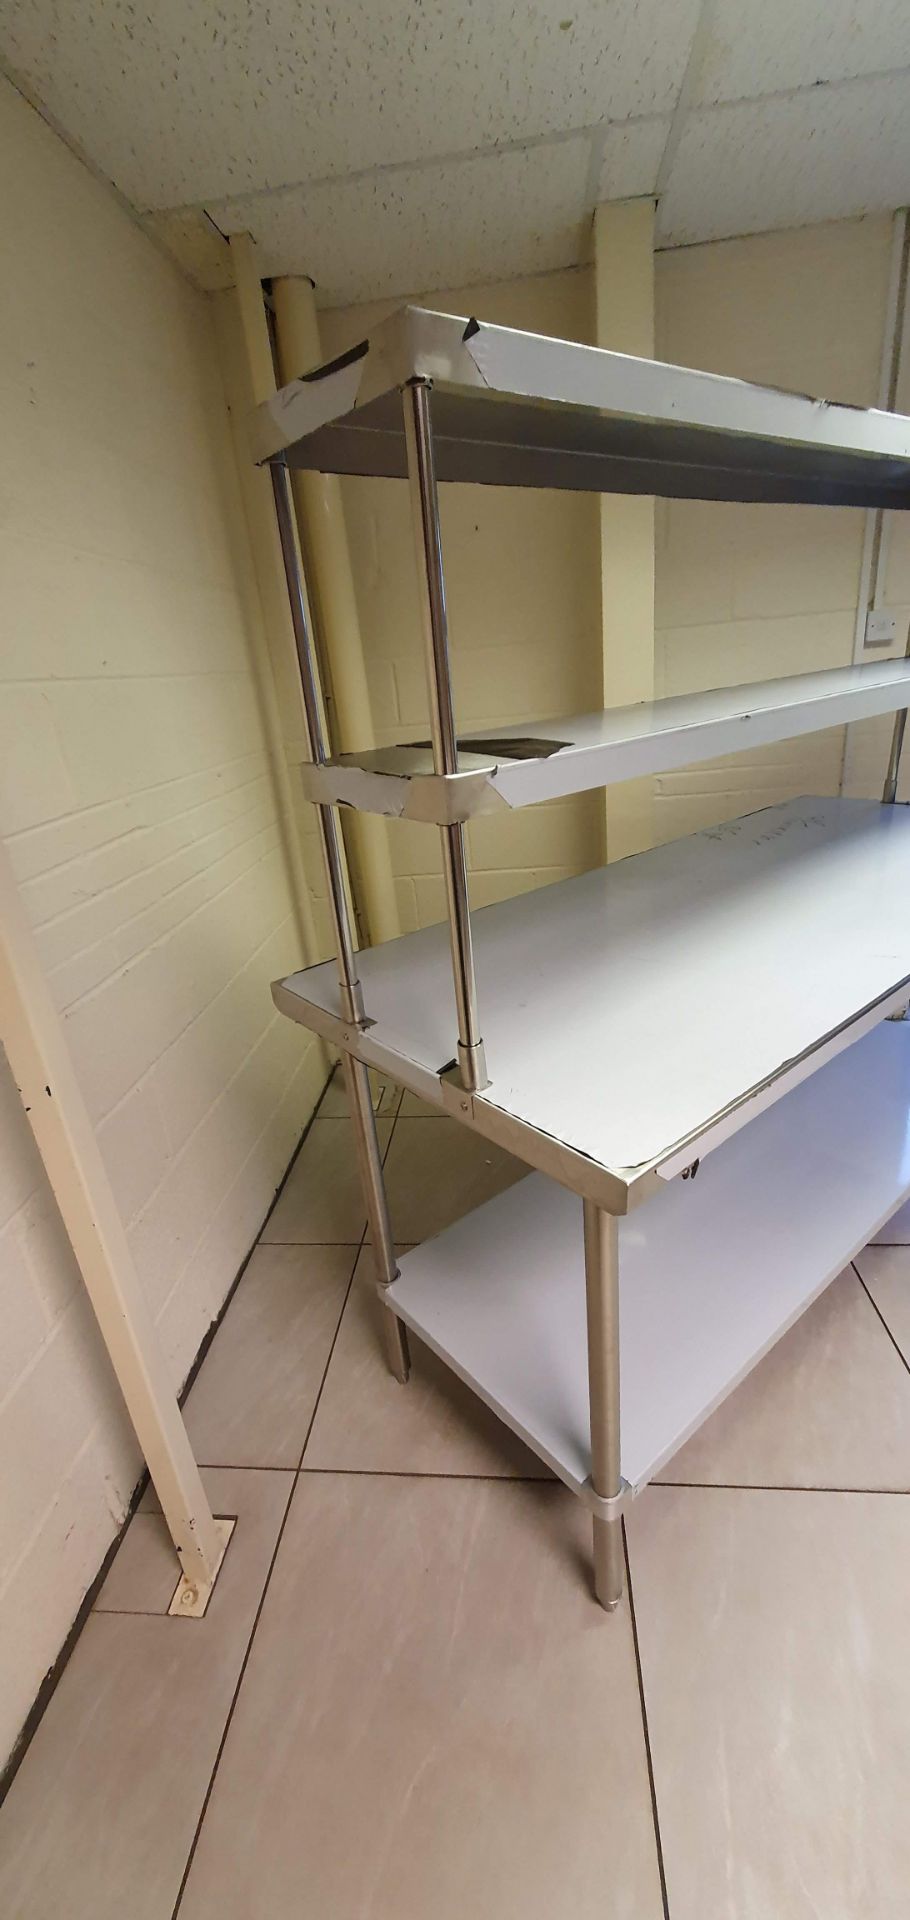 Stainless Steel Table - Heavy Duty - Image 2 of 3